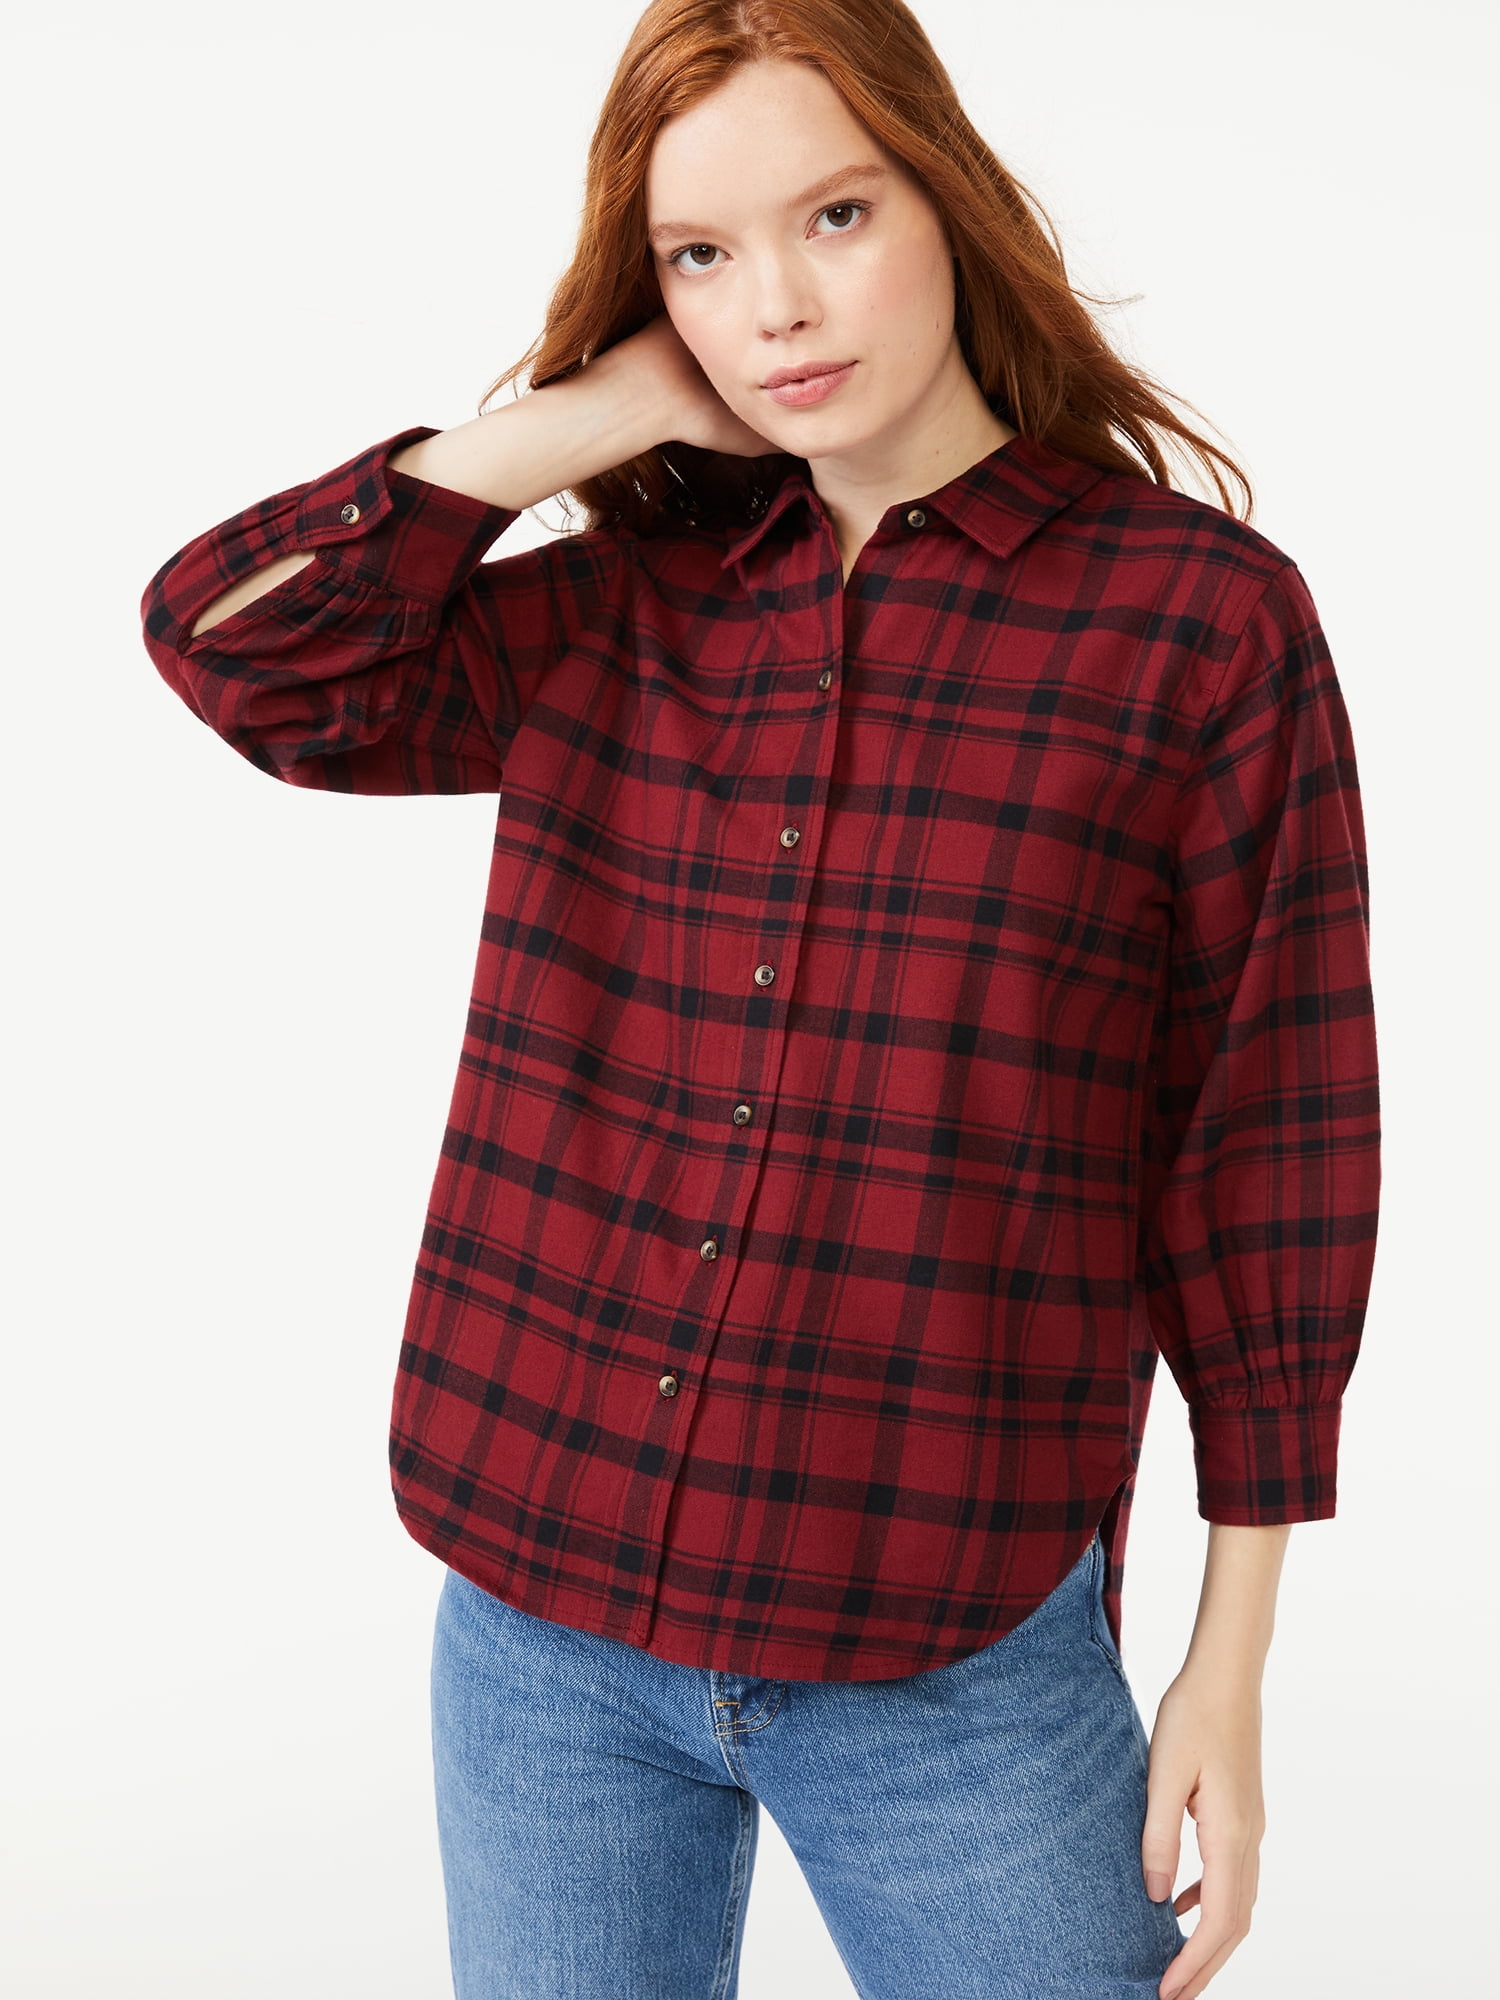 Free Assembly Women's Button-Down Top with ¾ Blouson Sleeves - Walmart.com